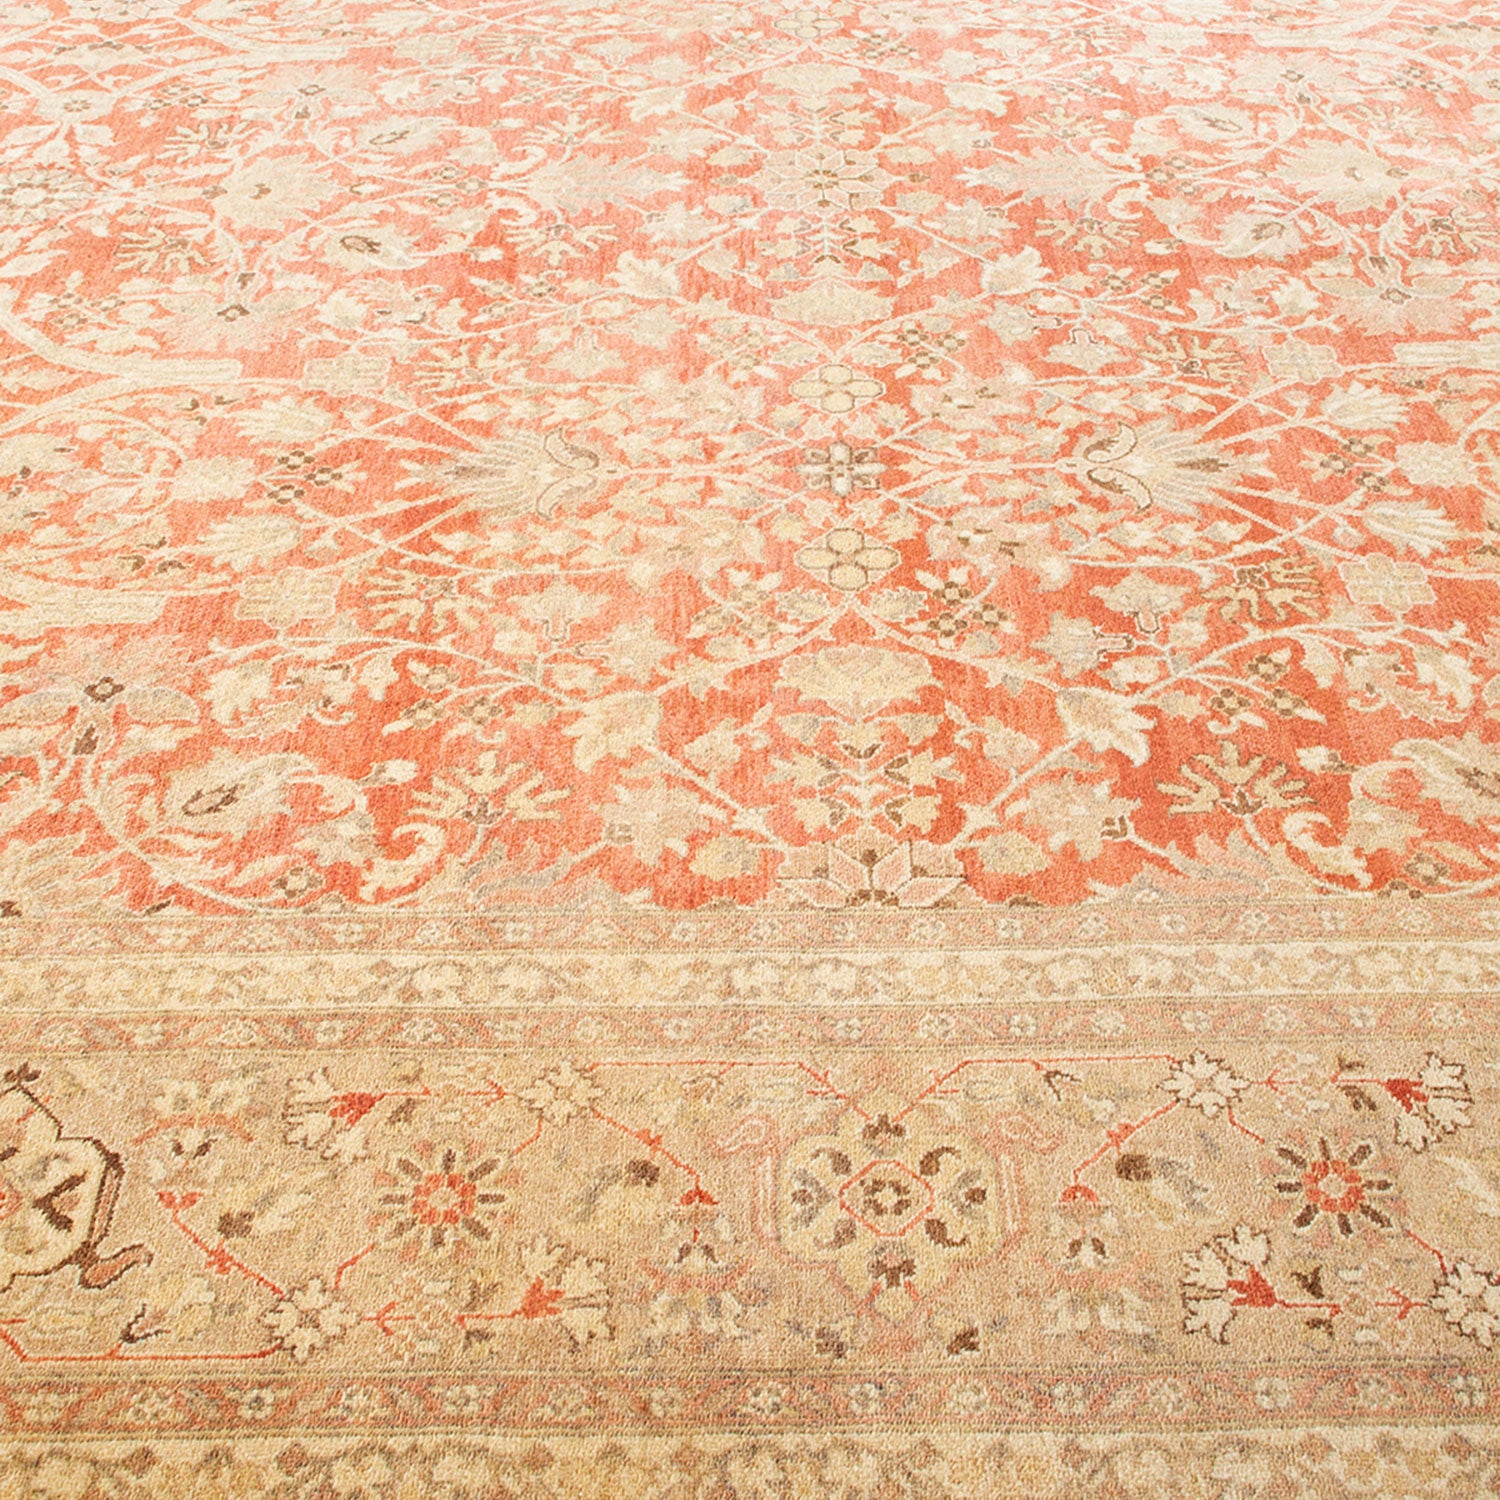 Exquisite hand-woven rug with intricate floral pattern in warm tones.